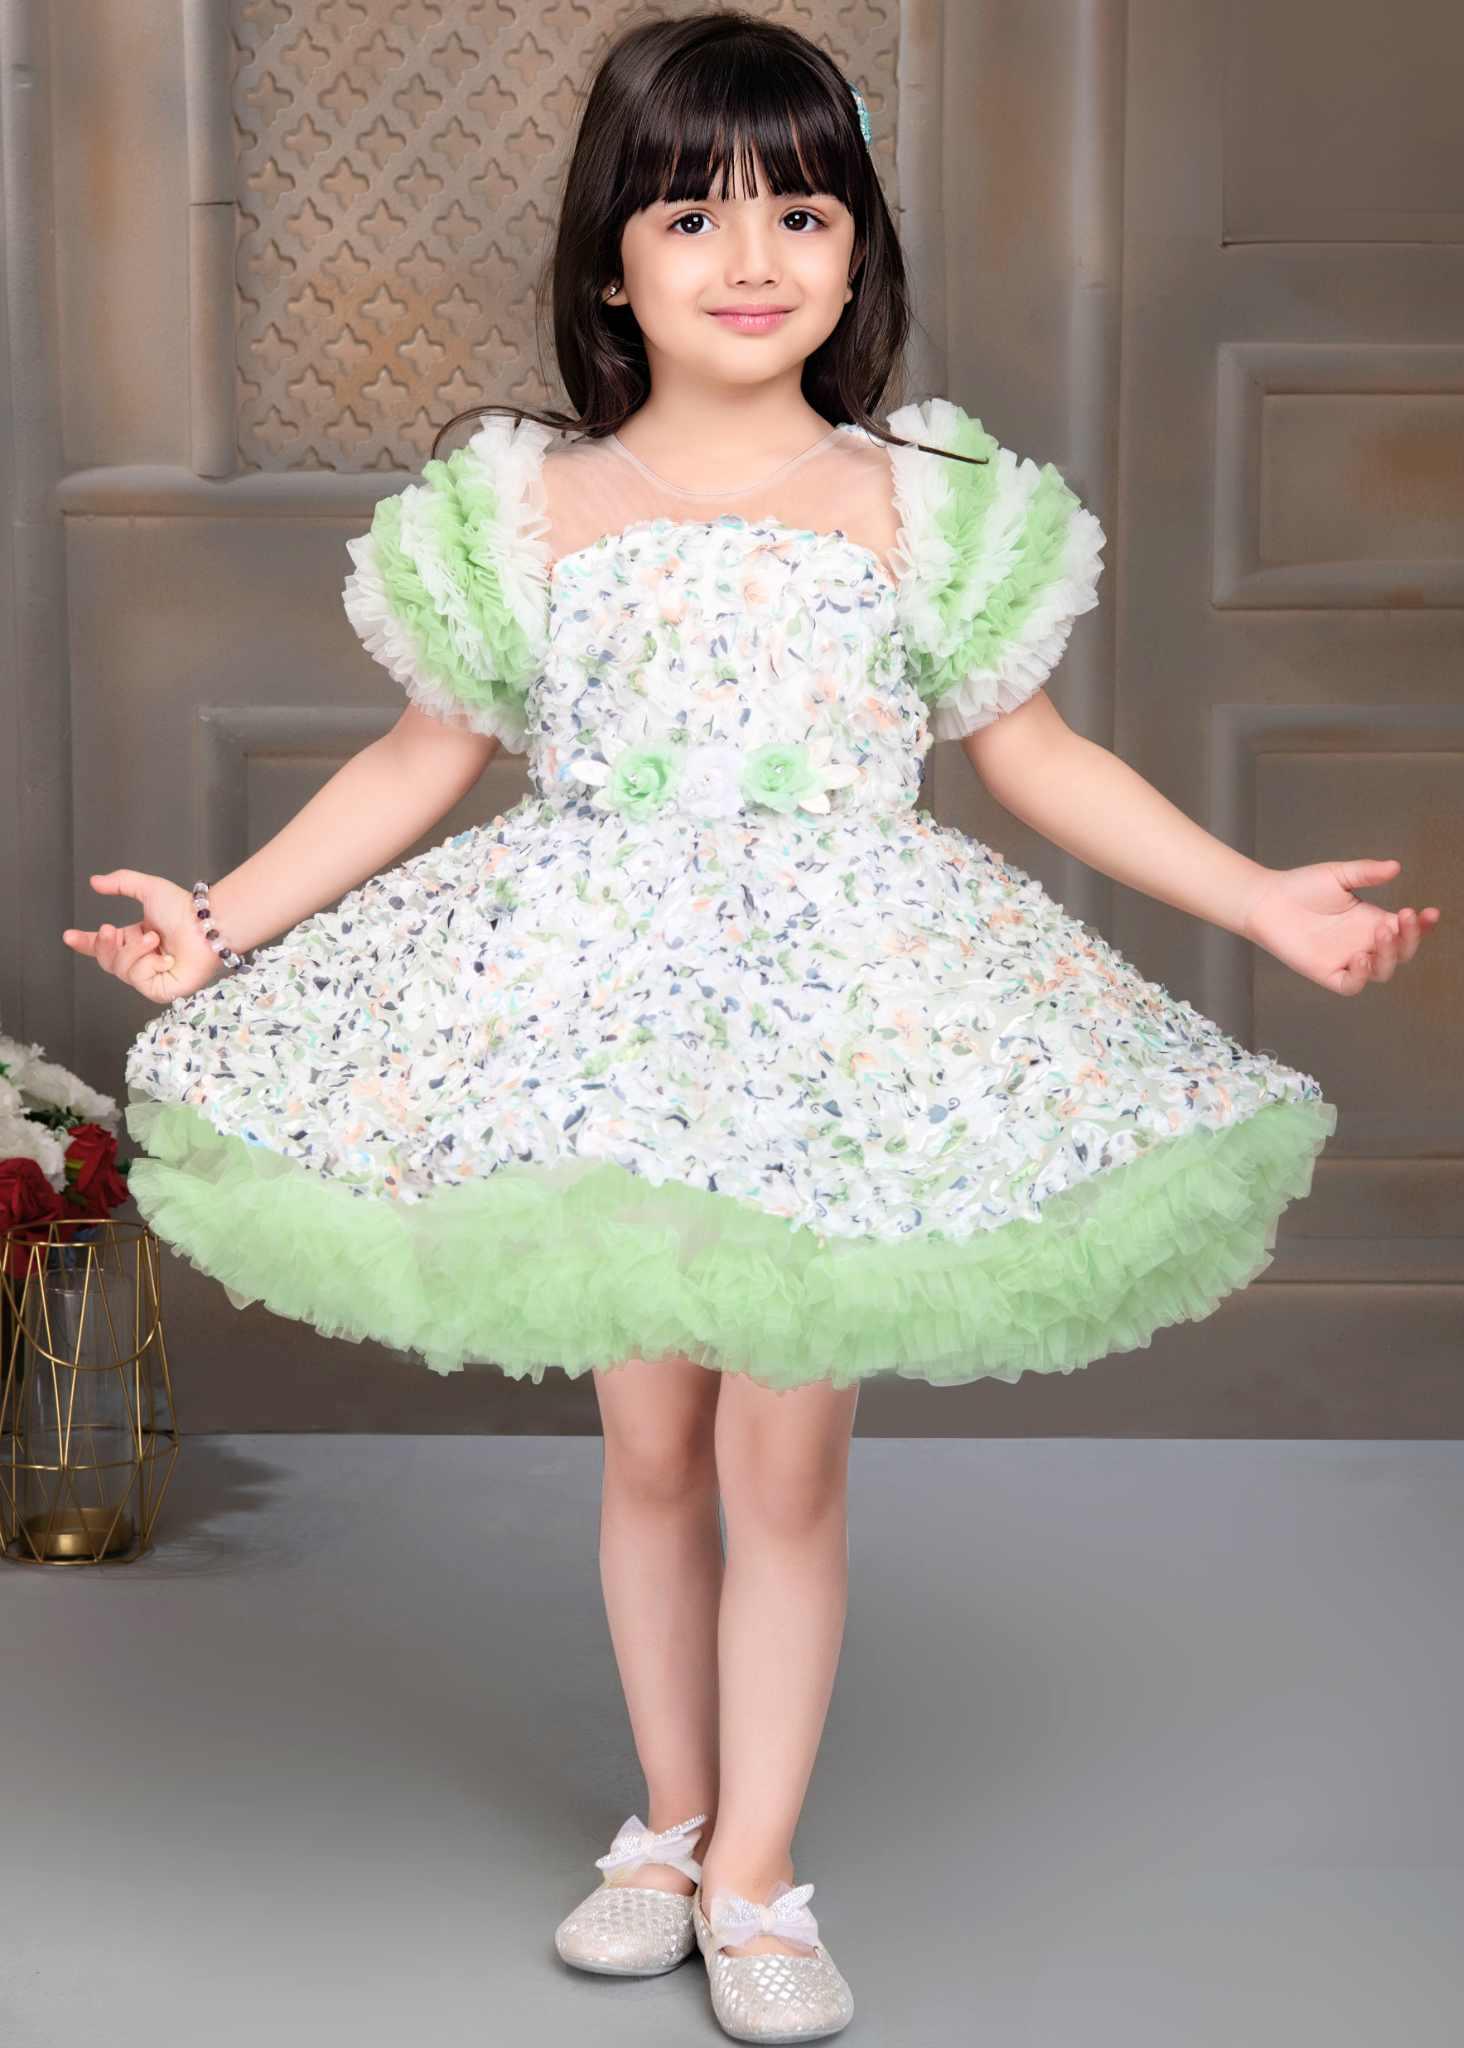 Floral Printed Bushy Net Green Frock With Ruffled Net Sleeves For Girls - Lagorii Kids